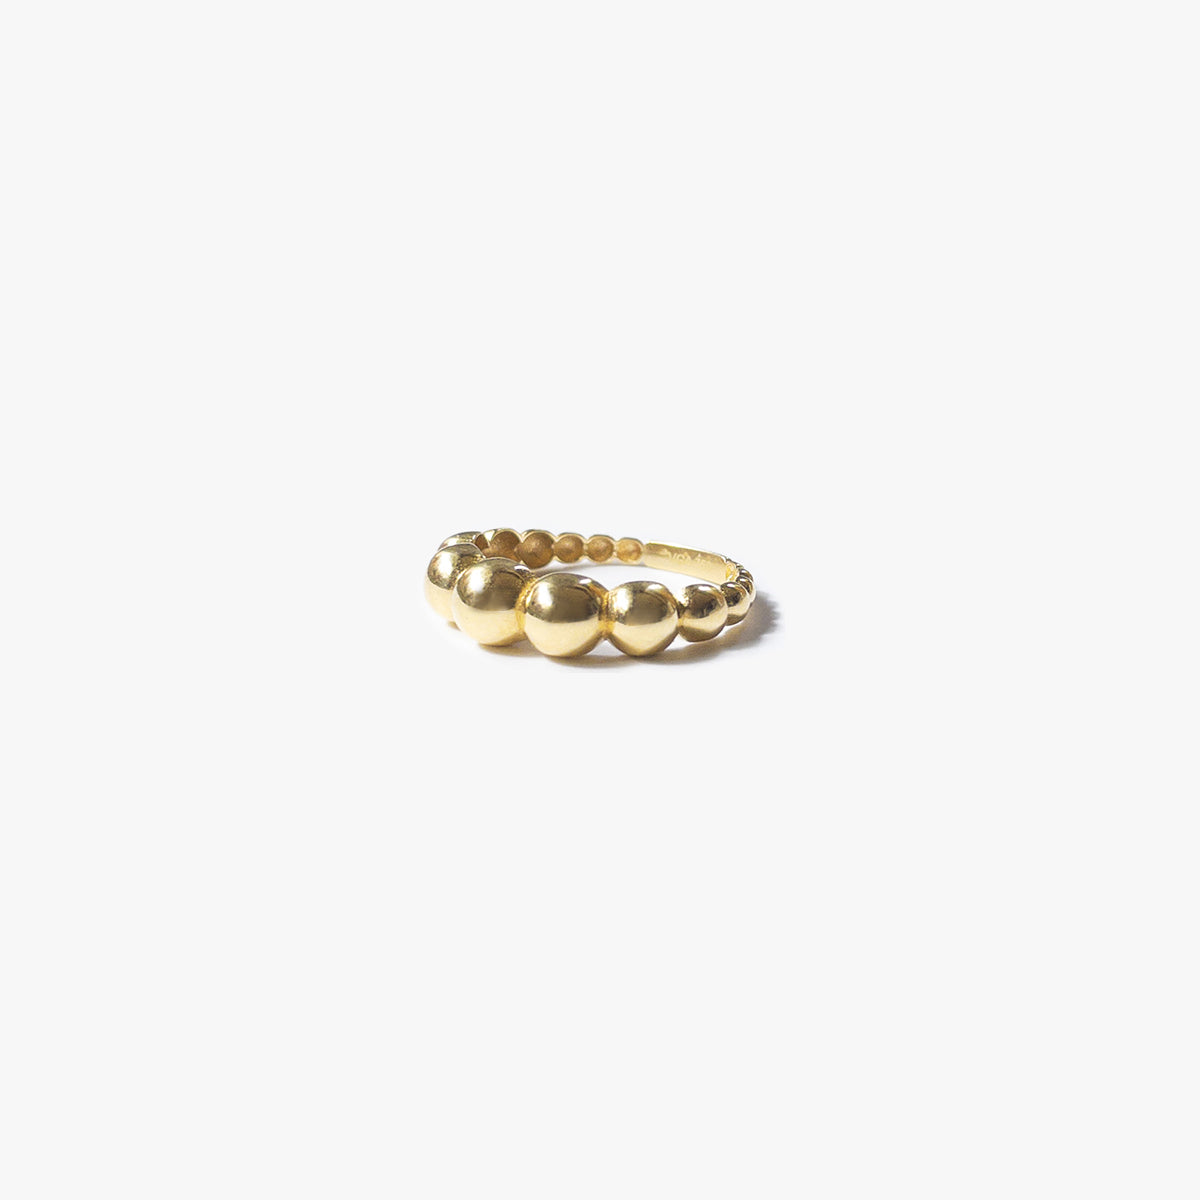 The Statement Poppy Ring in Solid Gold